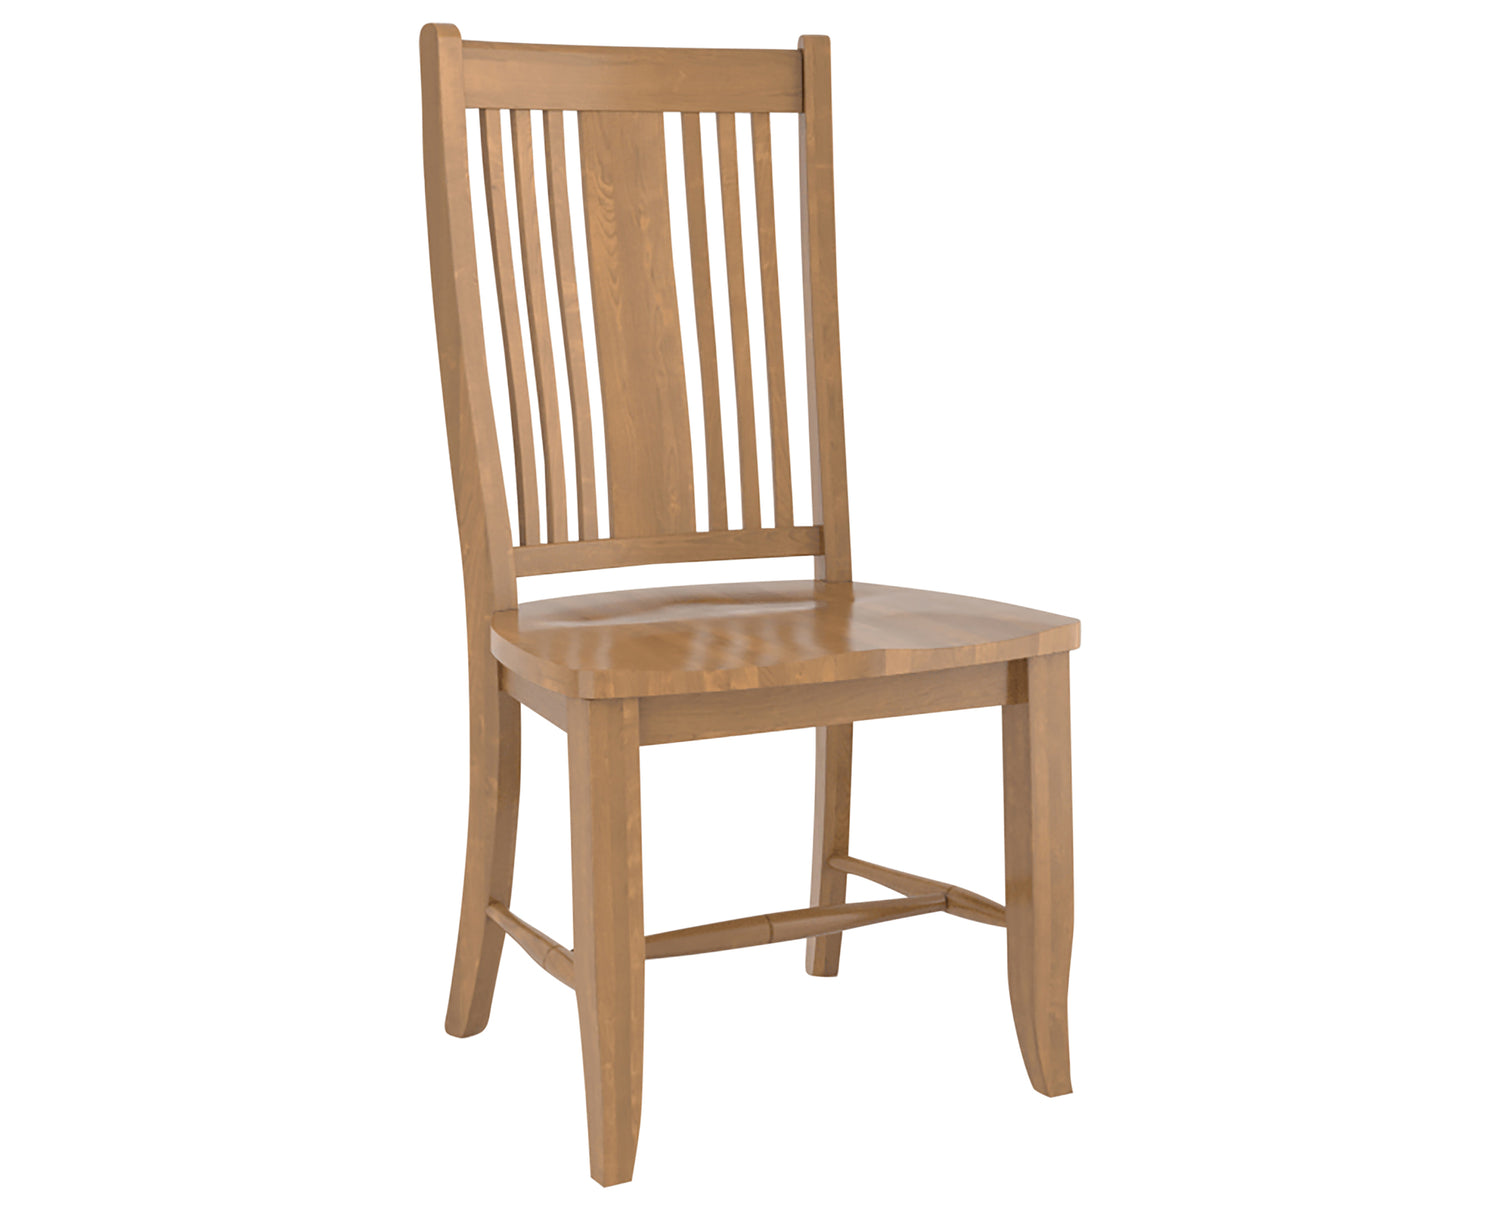 Honey Washed | Canadel Core Dining Chair 2250 | Valley Ridge Furniture